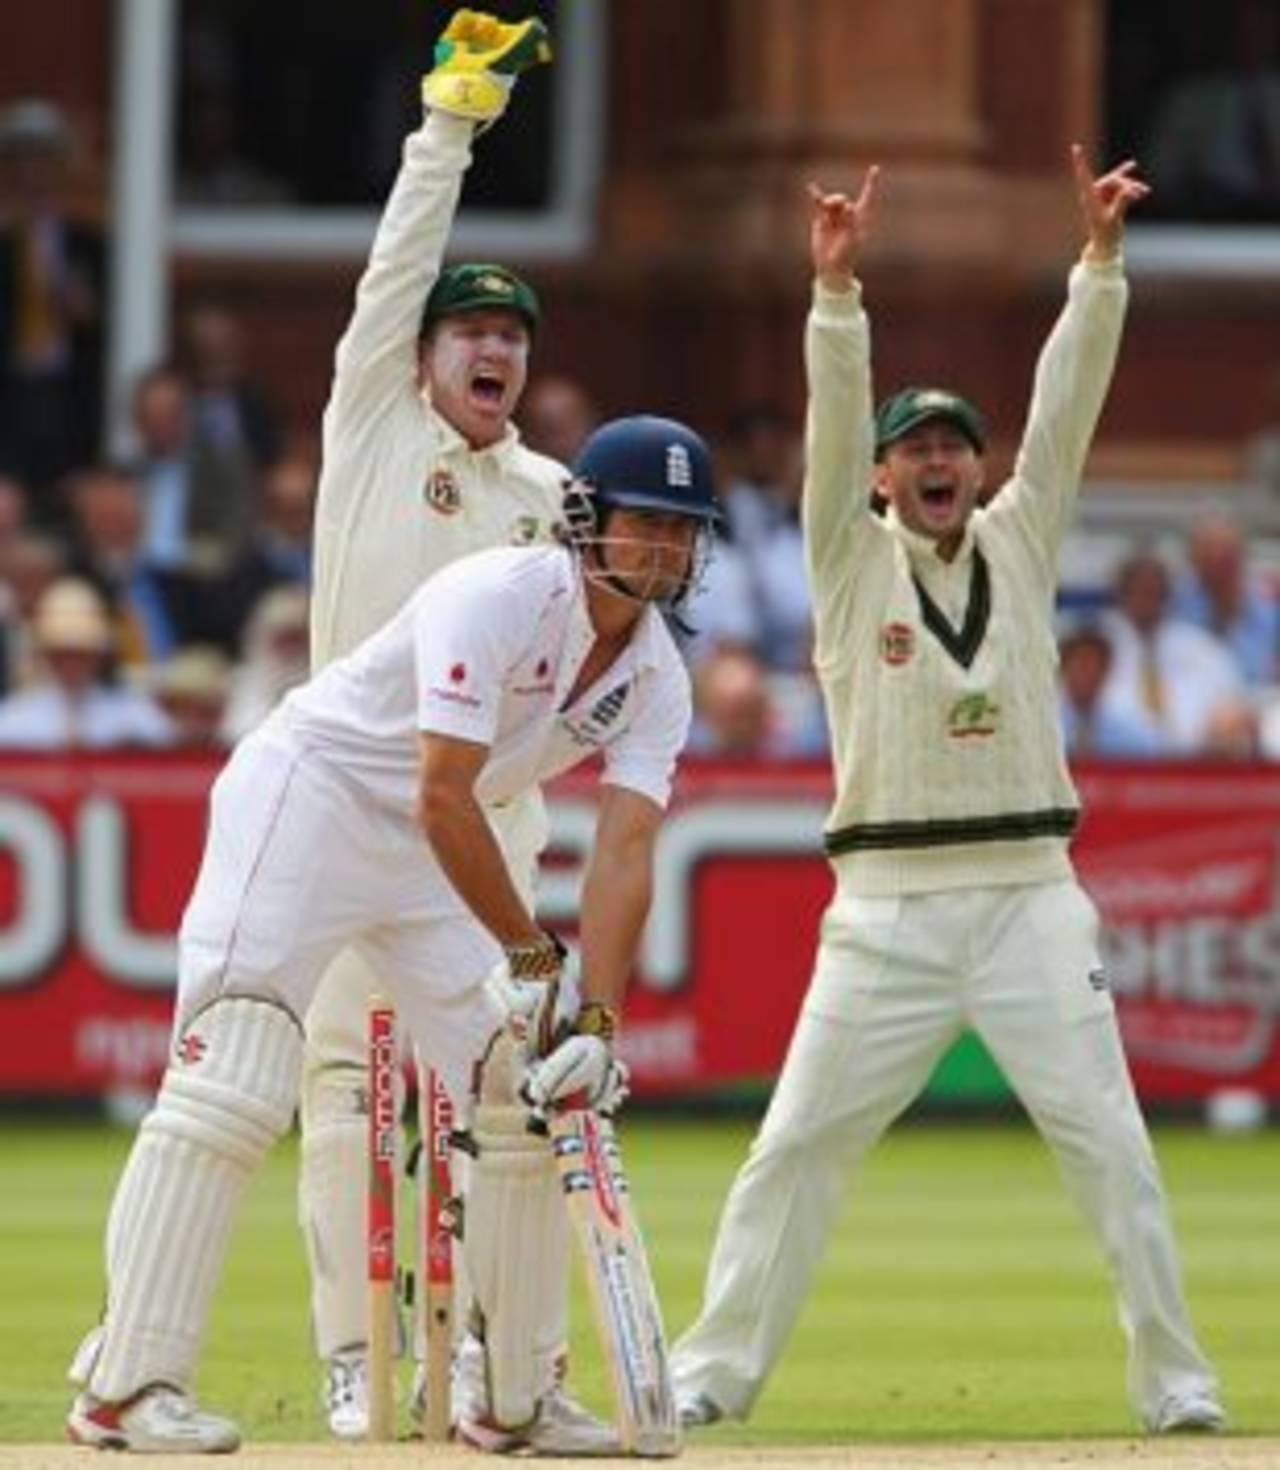 Knowing England, there will be more wobbles to come&nbsp;&nbsp;&bull;&nbsp;&nbsp;Getty Images